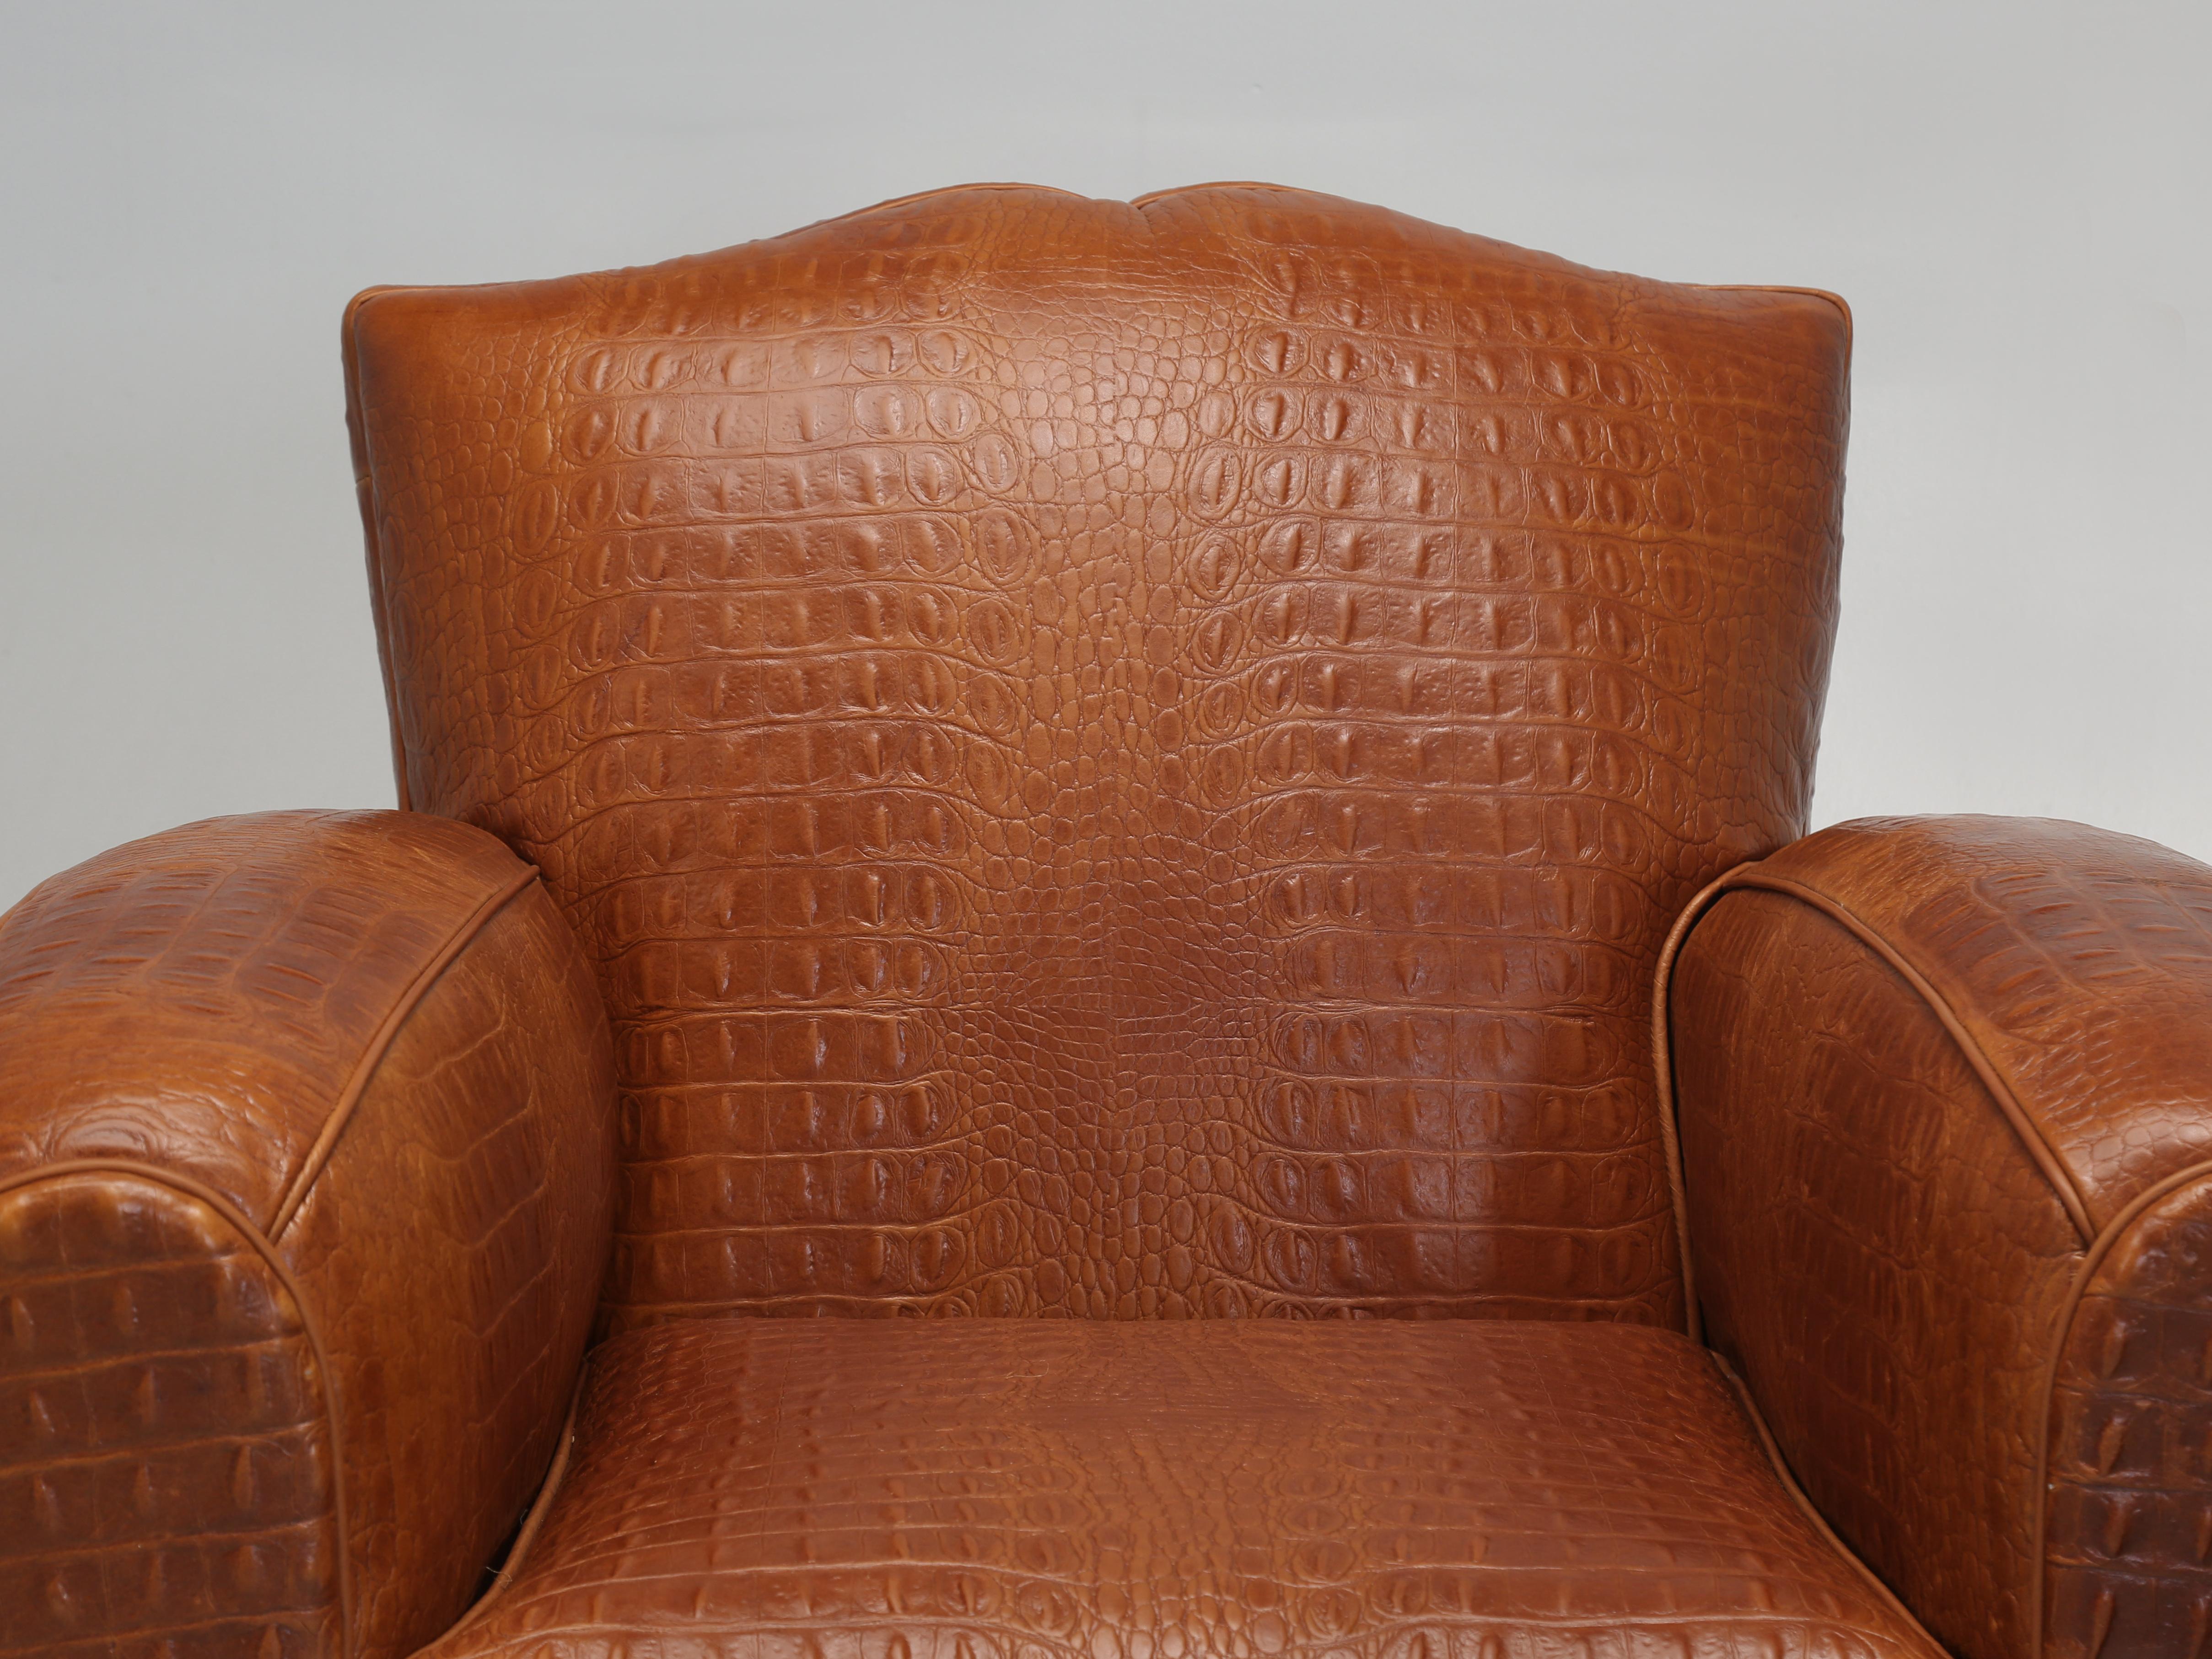 French Art Deco Moustache Style Leather Club Chair upholstered in a Gorgeous Cognac Colored Faux Crocodile Real Leather imported from Italy and surprisingly soft for an Embossed Leather. We were inspired by our Original Crocodile 1920’s Club Chair,